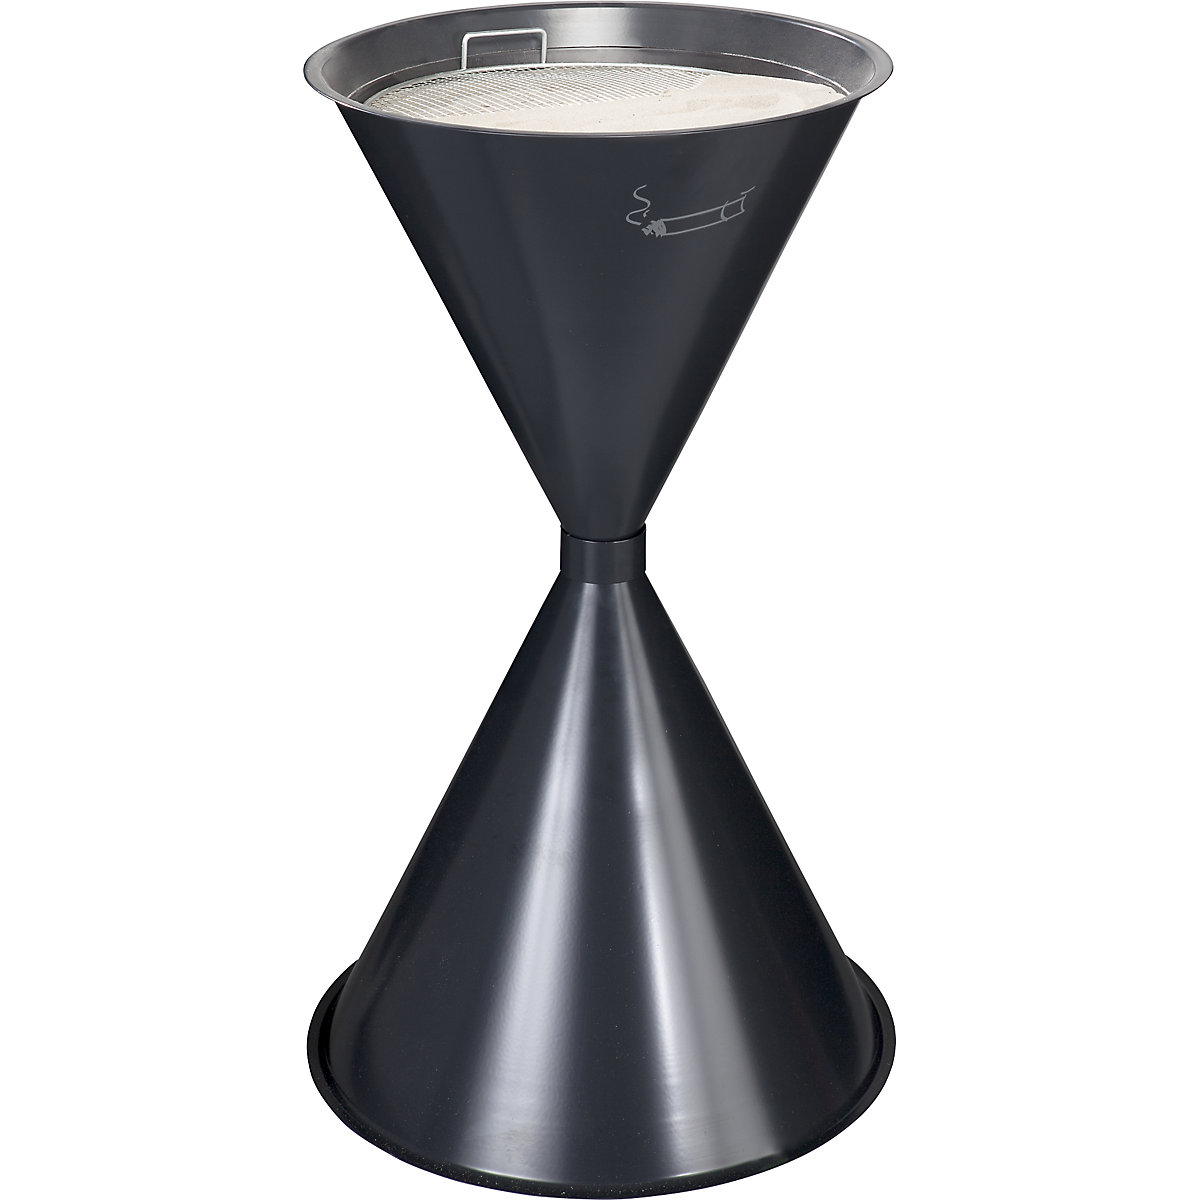 VAR – Conical ashtray made of metal, sheet steel, powder coated, anthracite